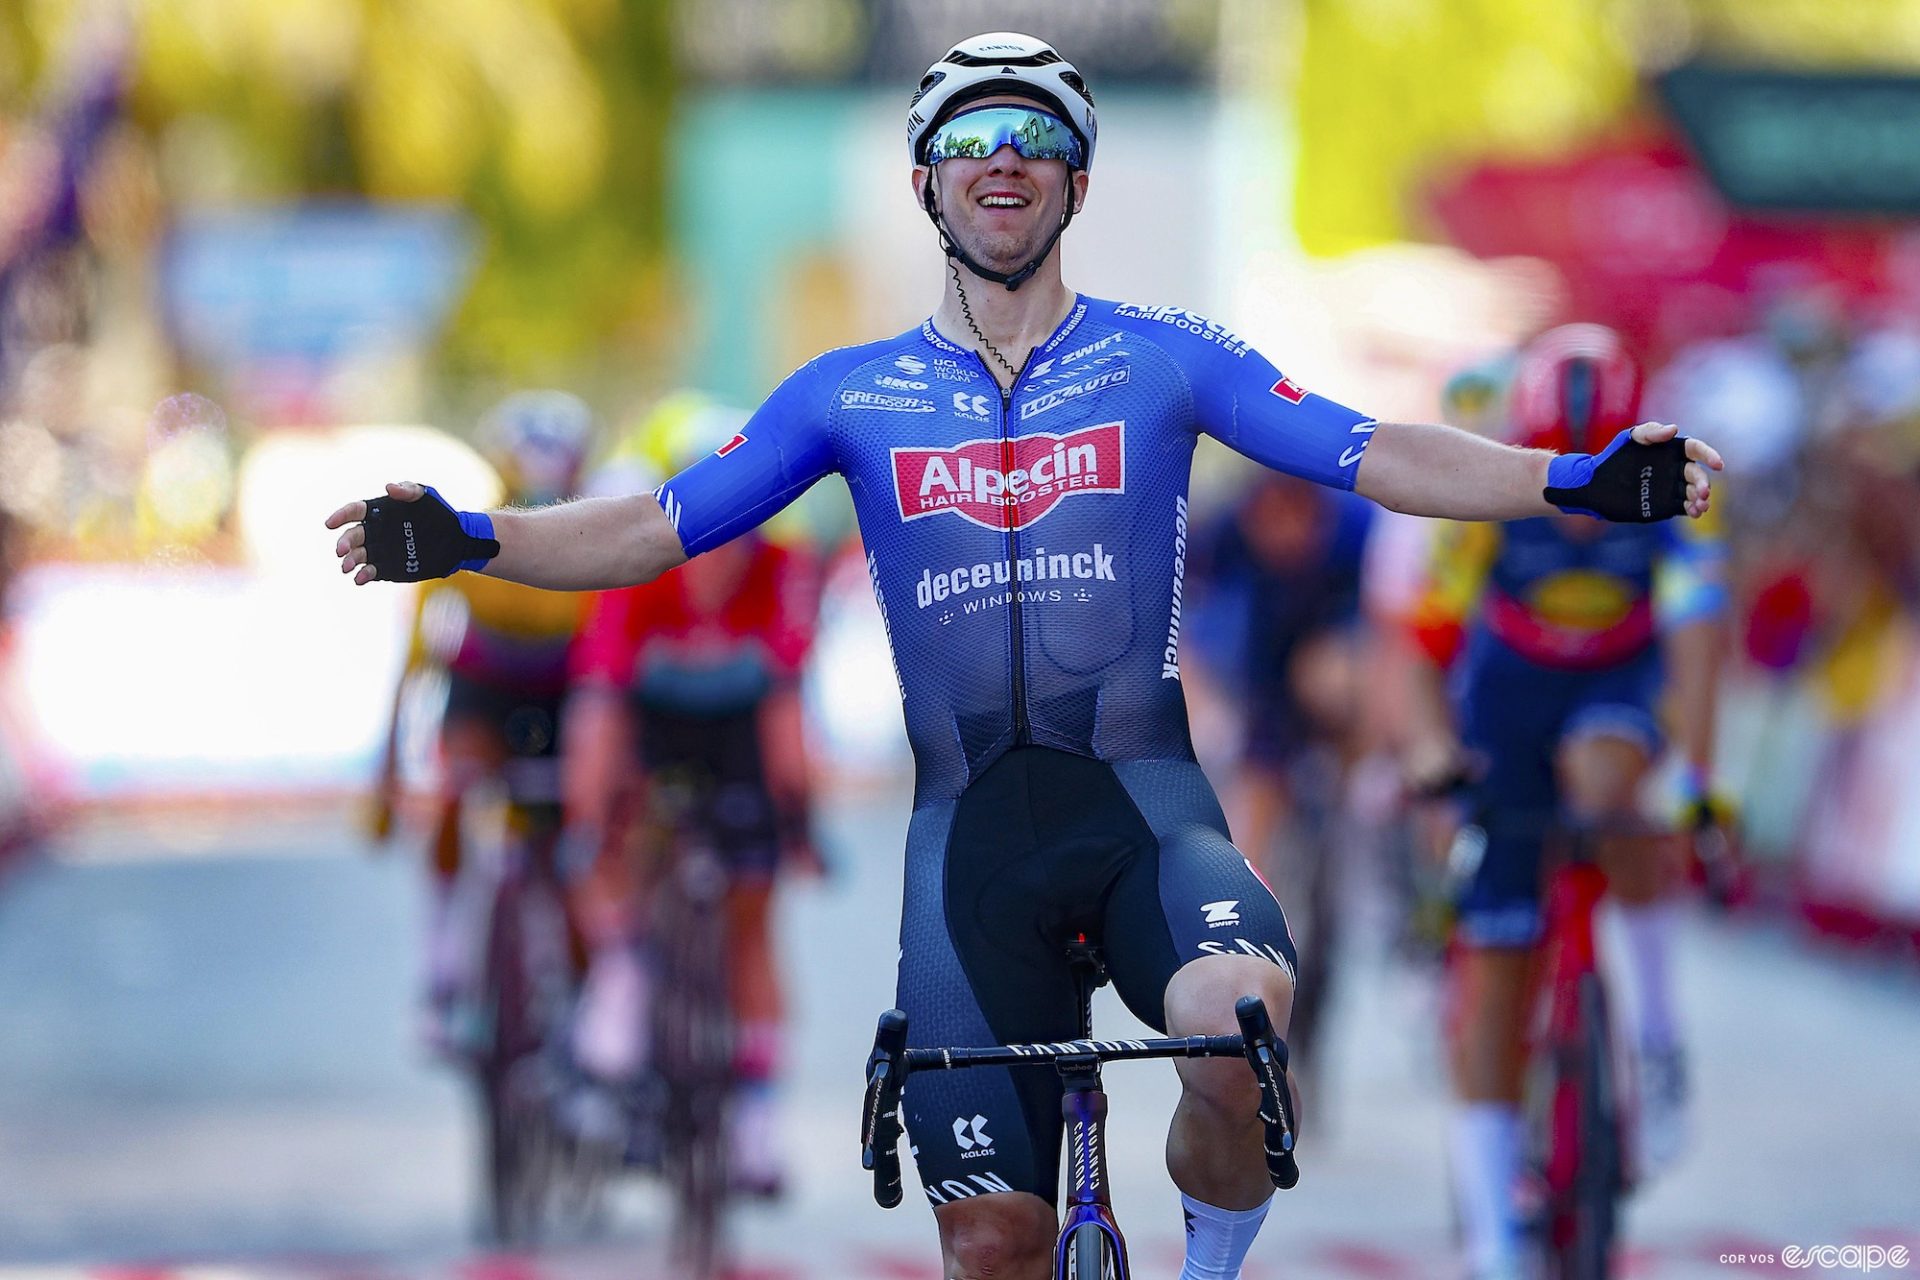 Professional cyclist Kaden Groves, dressed in the primarily dark blue kit of Alpecin-Deceuninck, celebrates a stage victory by extending his arms horizontally.